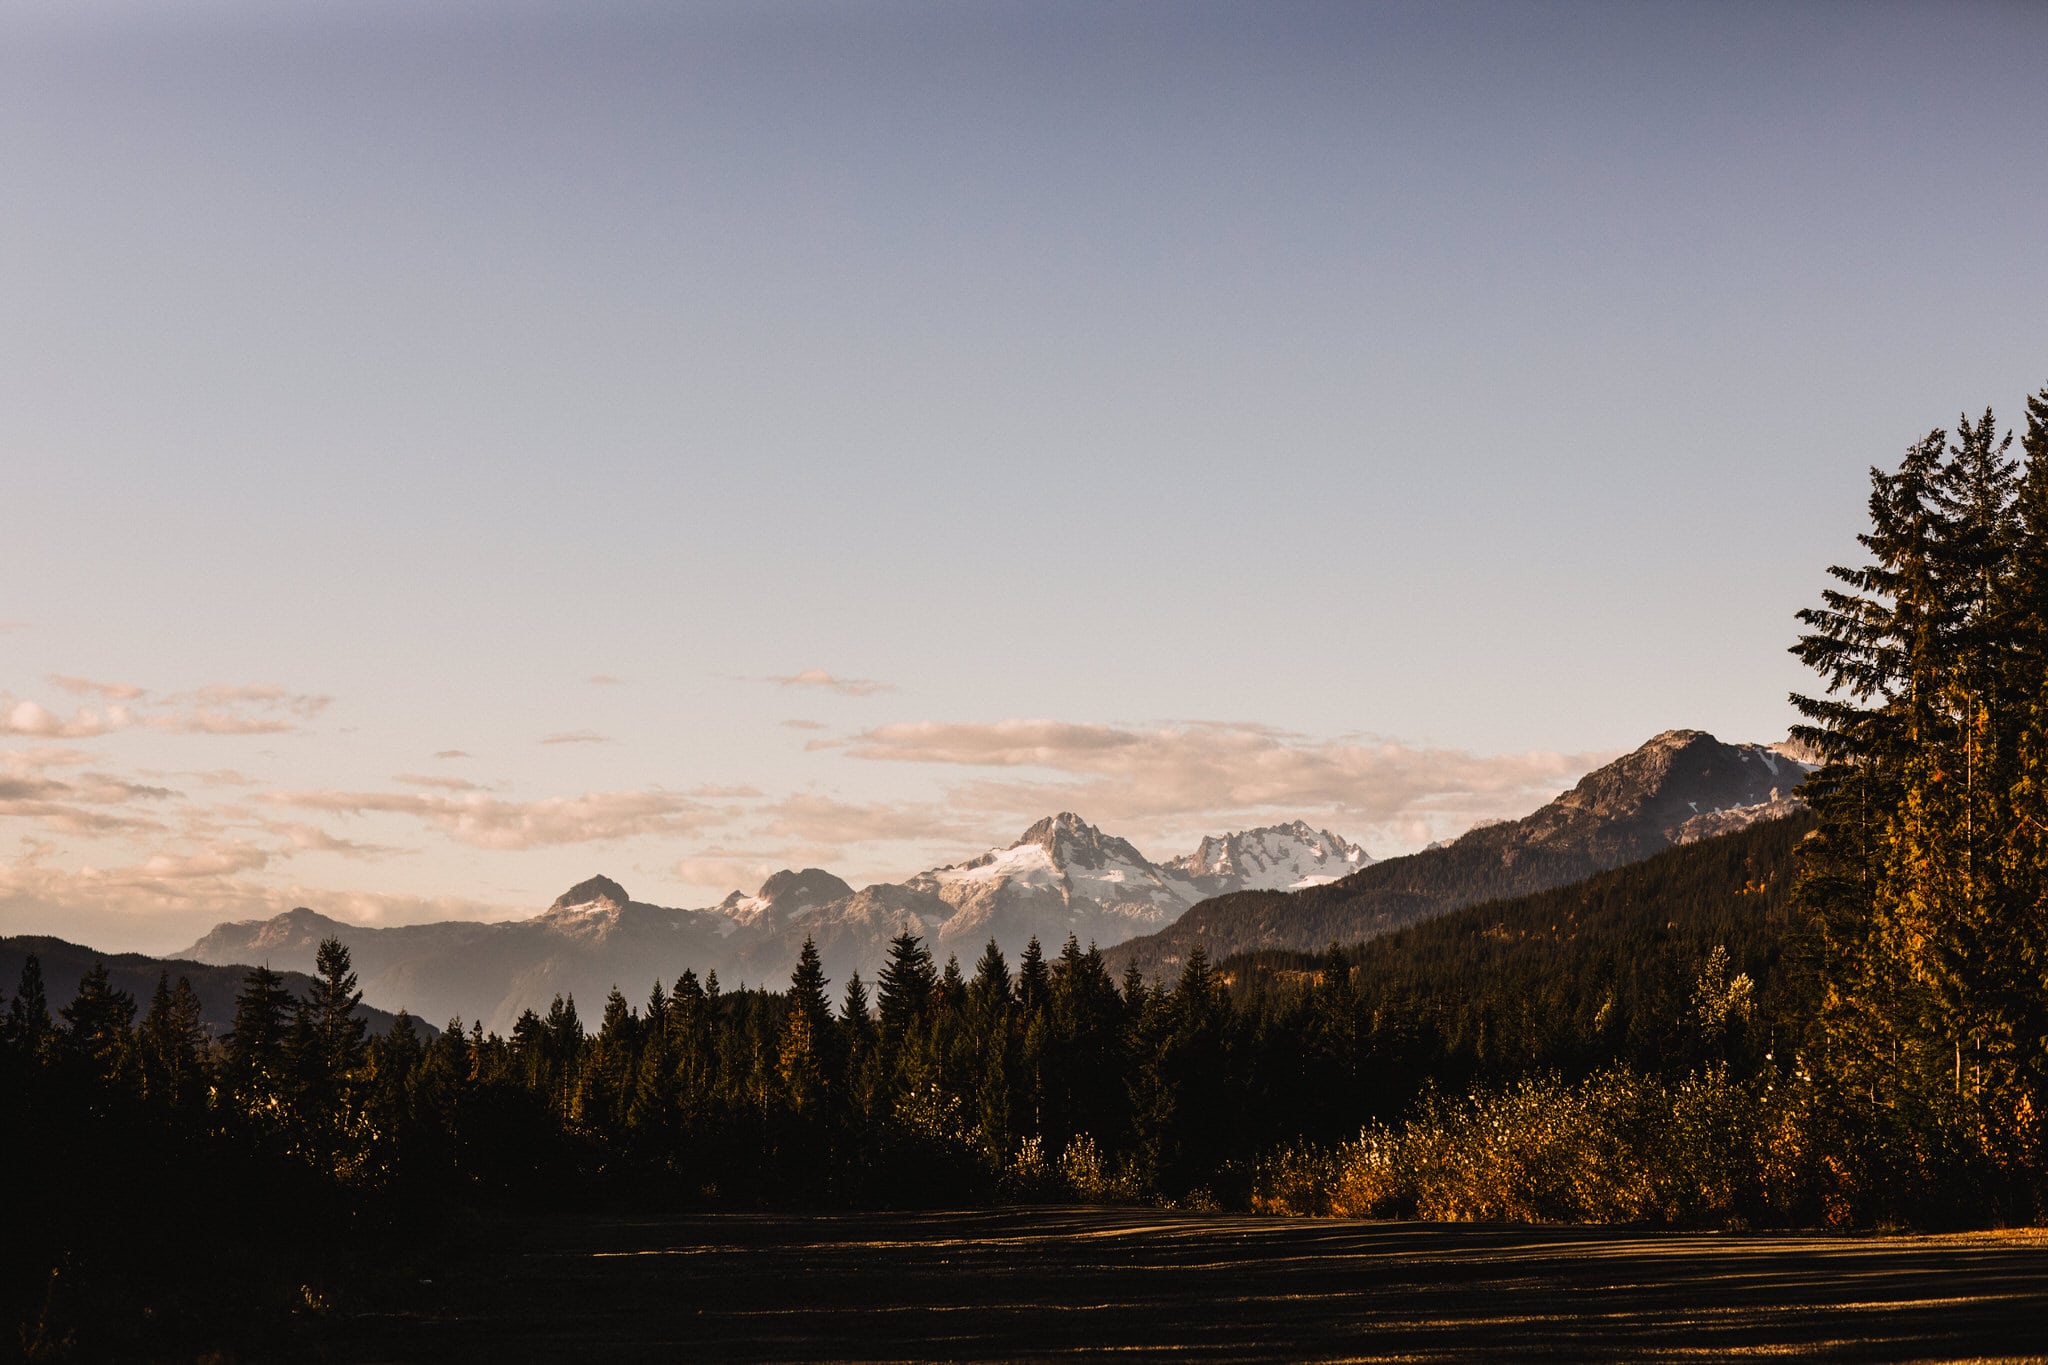 Sunrise over the mountains. Forest wedding mountains of Whistler. Destination wedding photographer Brent Calis.